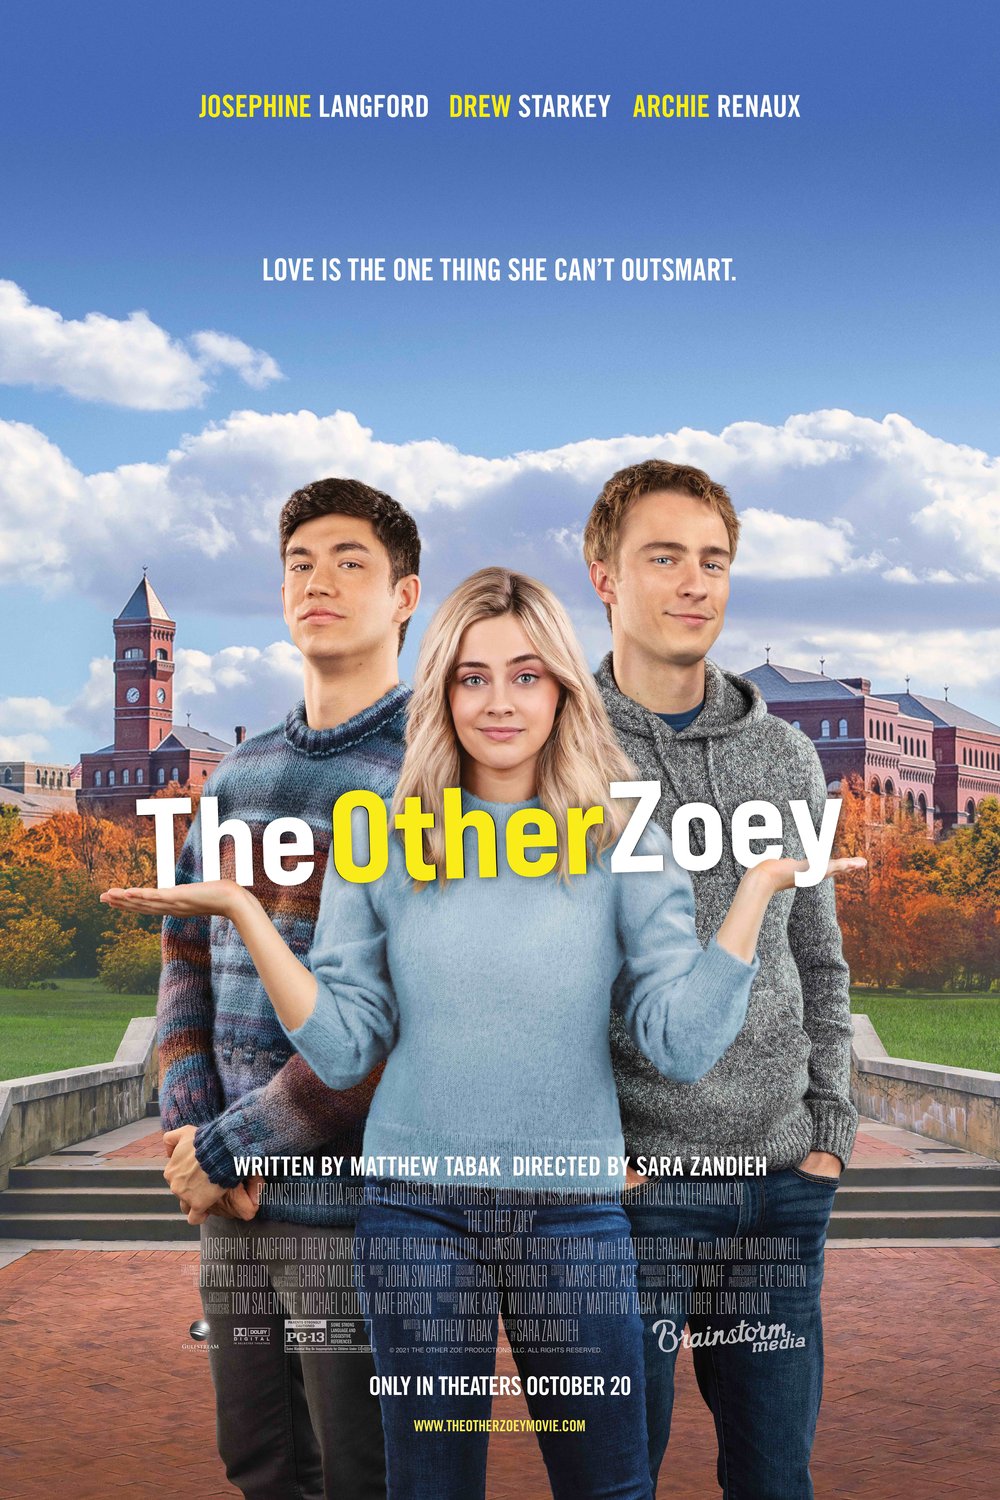 L'affiche du film The Other Zoey